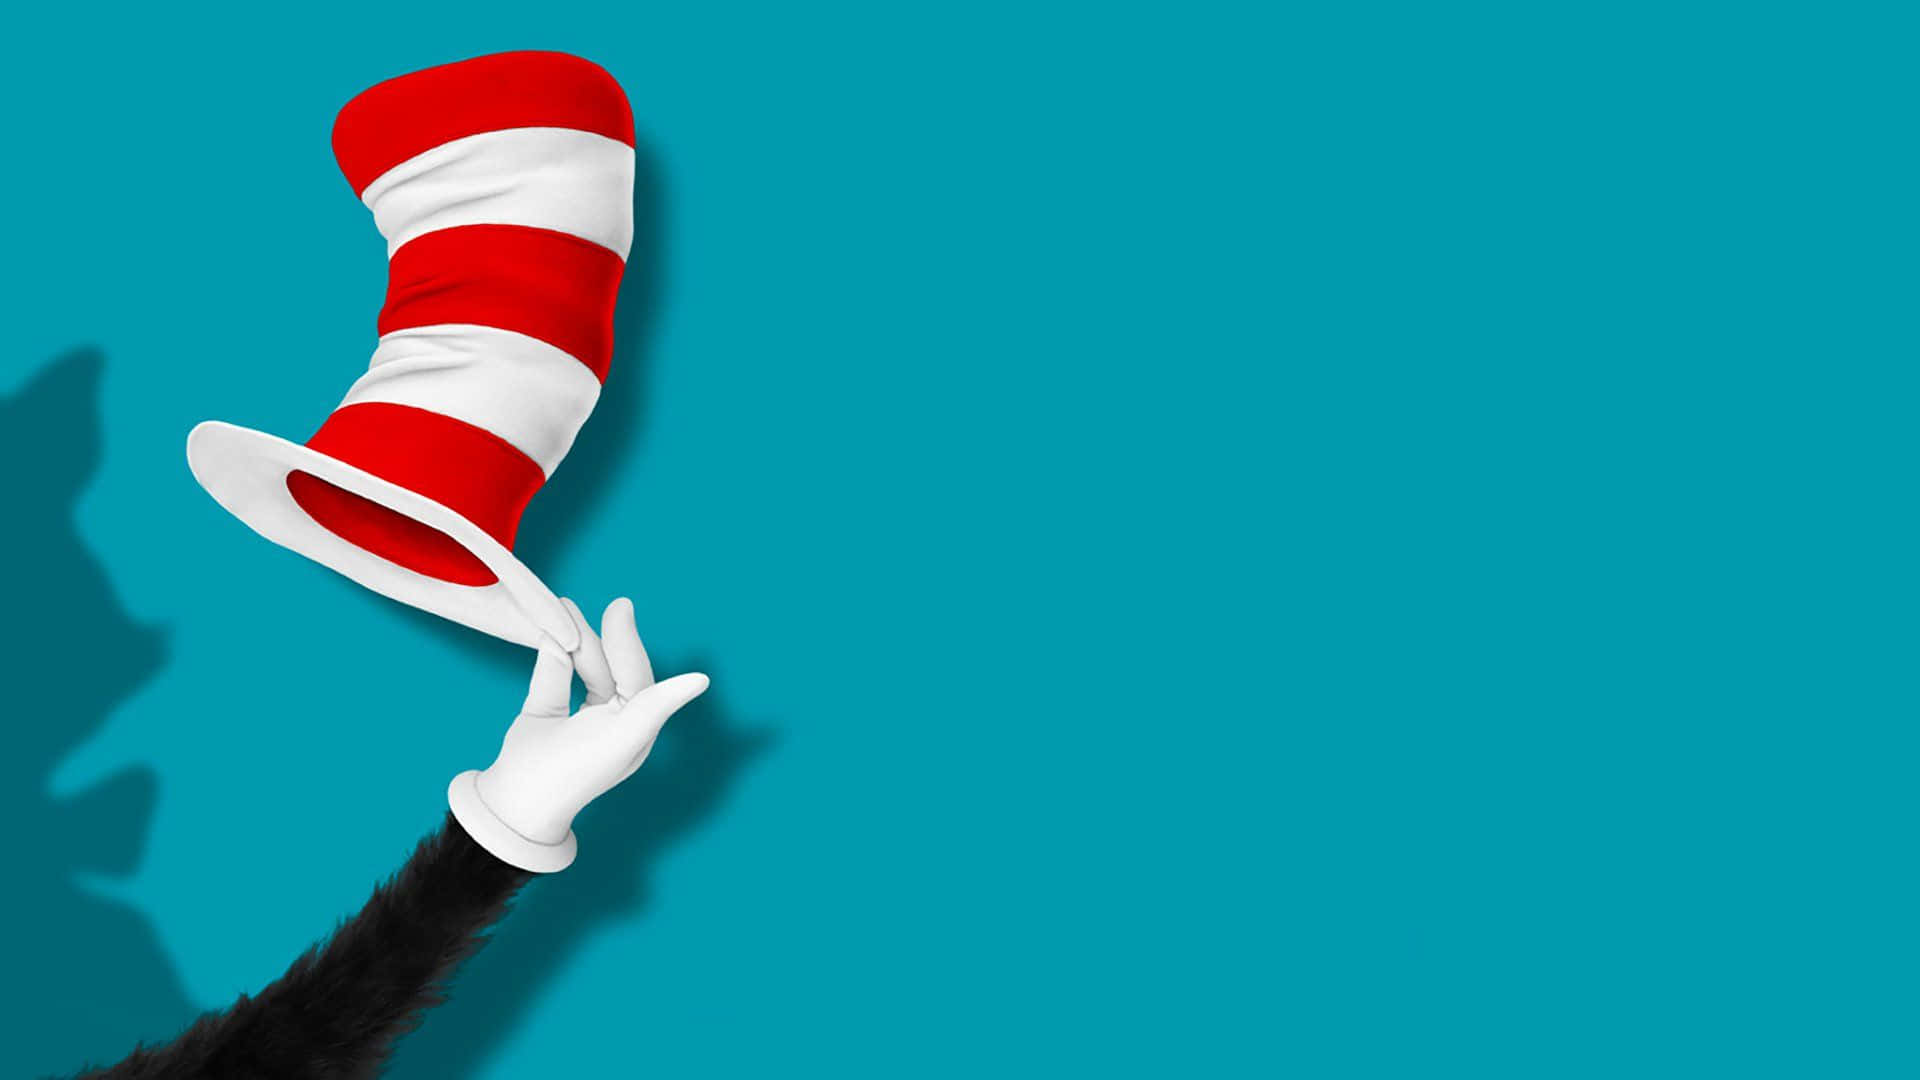 Dr. Seuss The Cat In The Hat Movie Poster Art Wallpaper